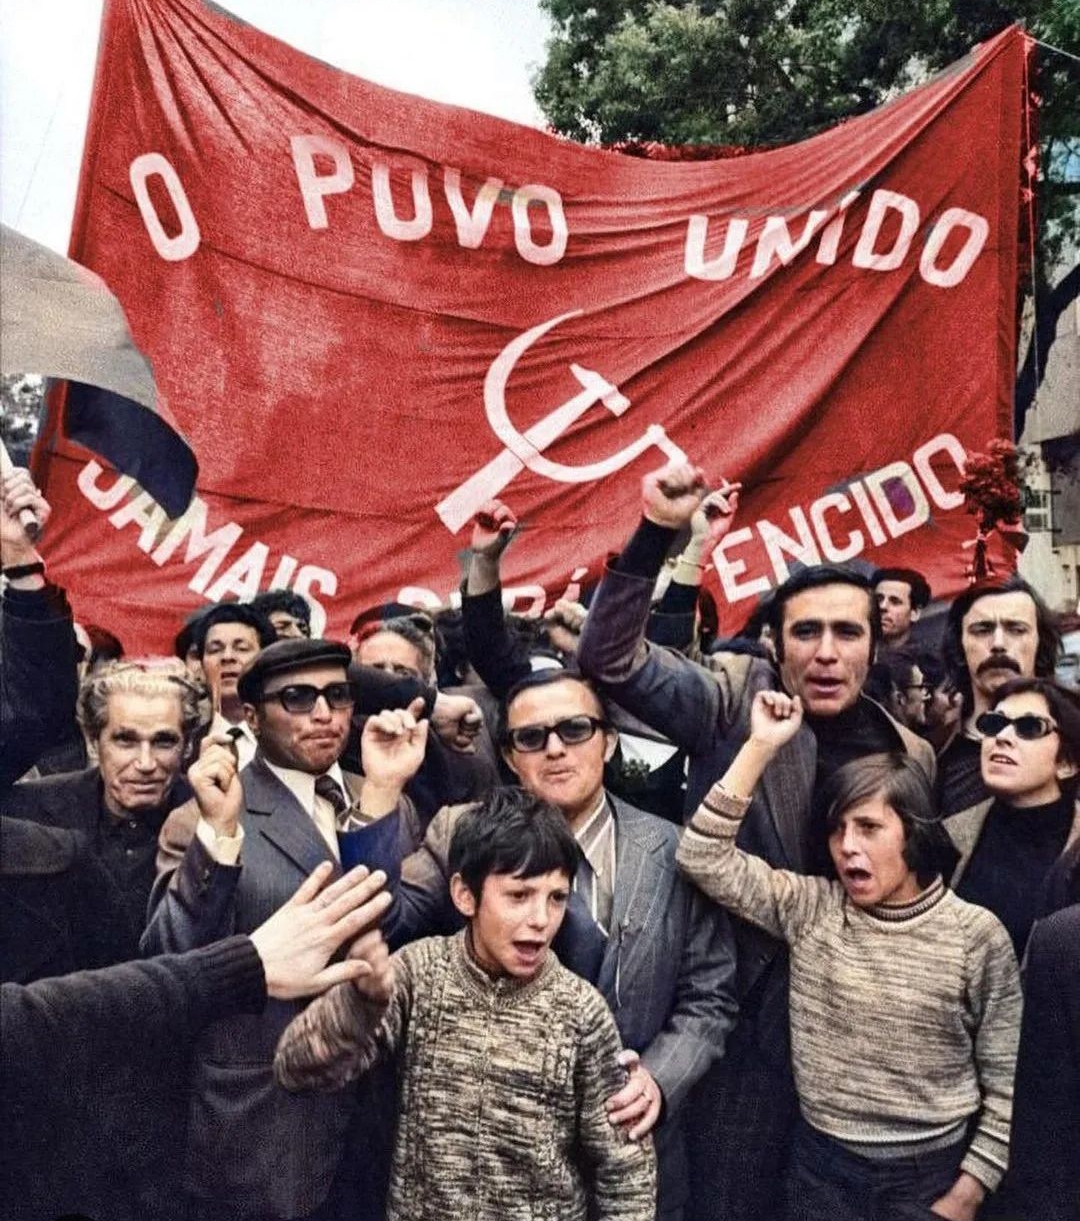 On this day in 1974, a mutiny in the Portuguese army put an end to the country’s dictatorship